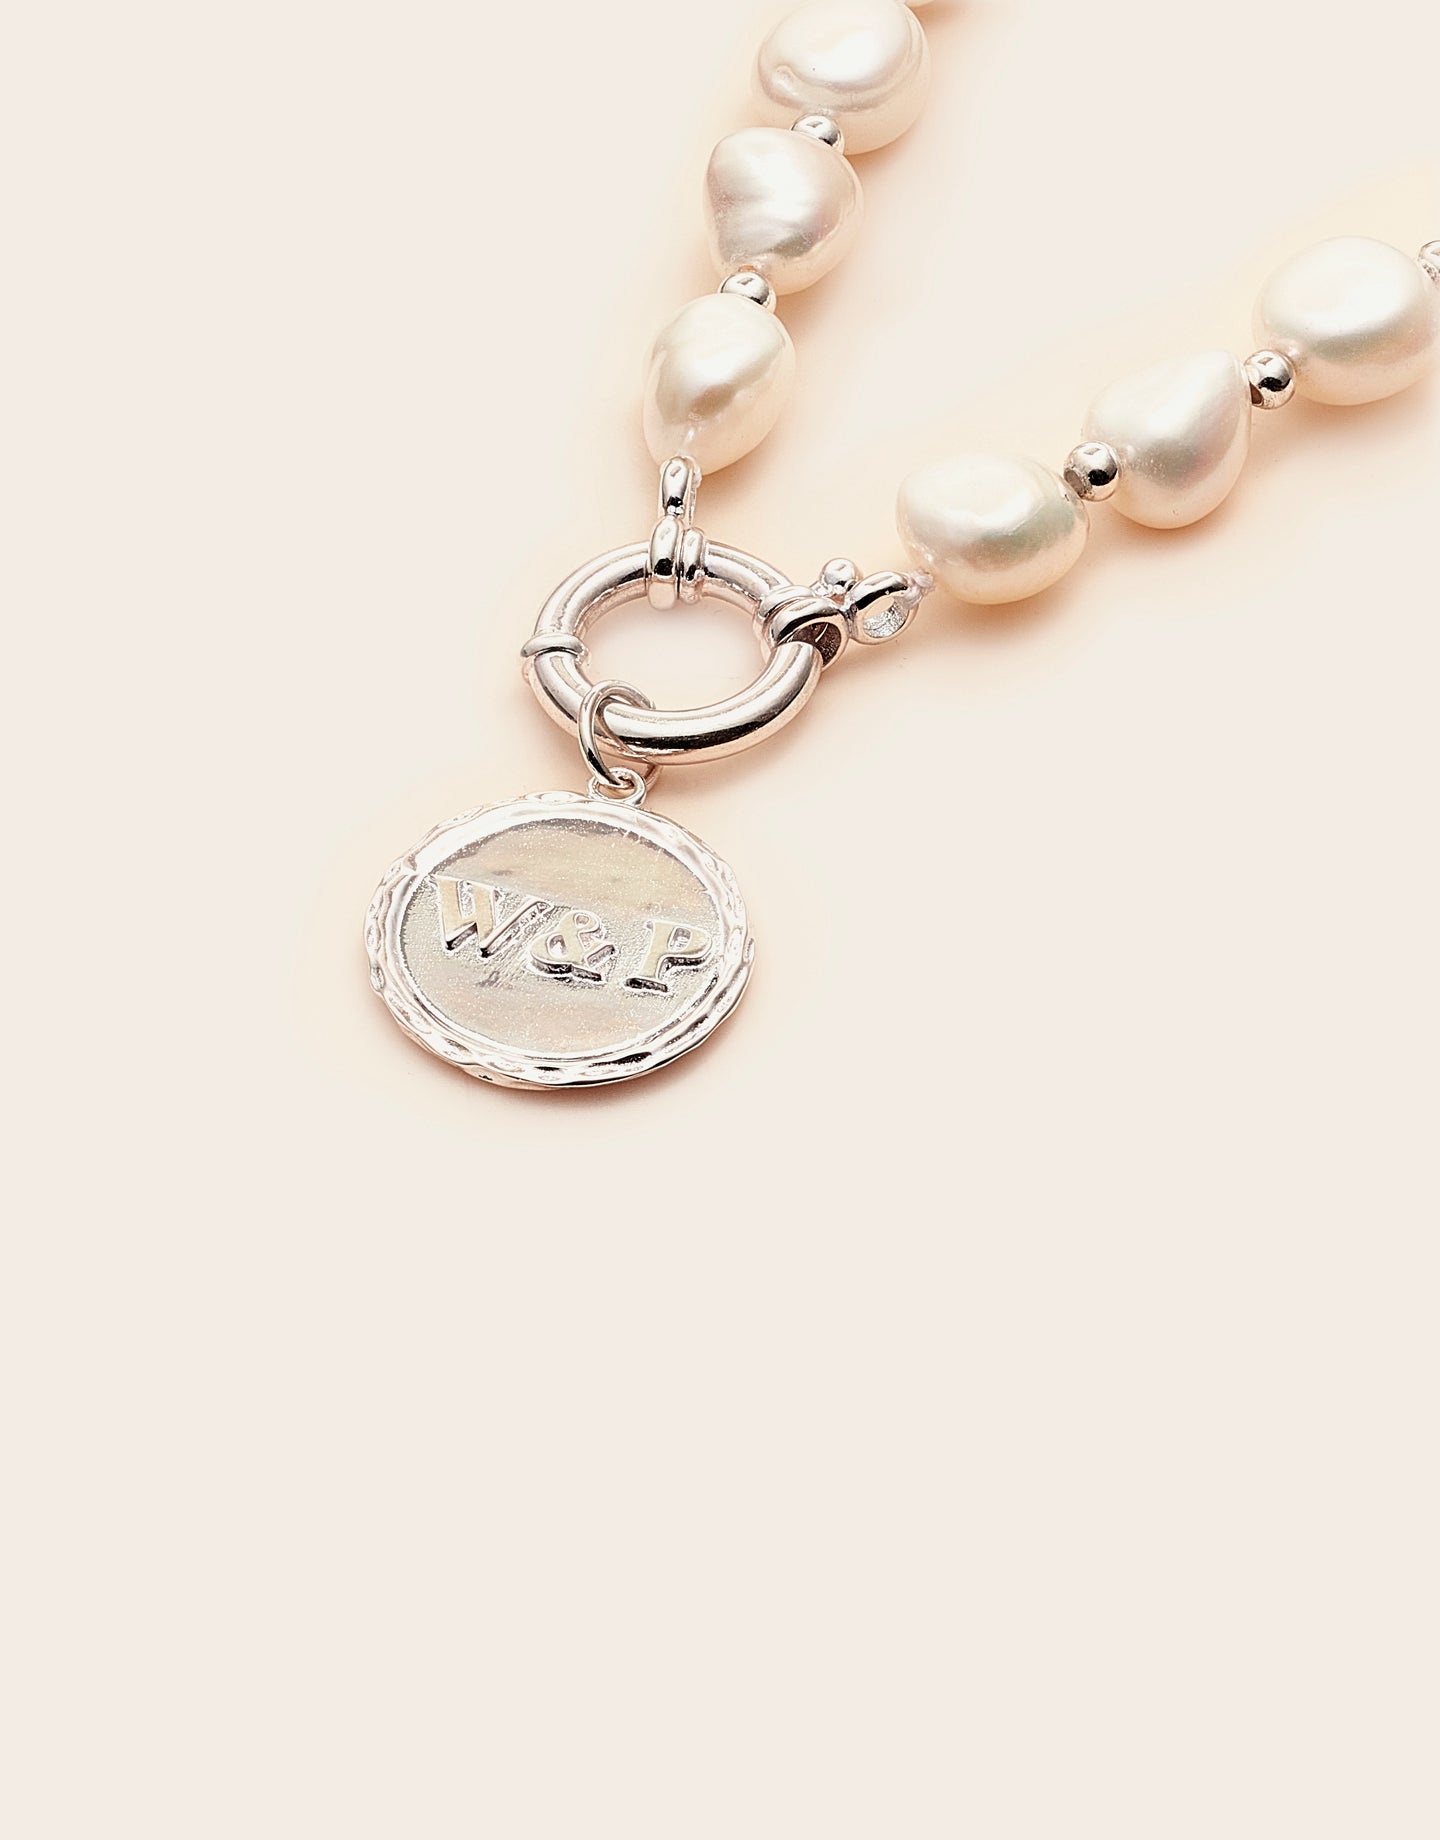 whistle-and-pop-necklace-pearl-1